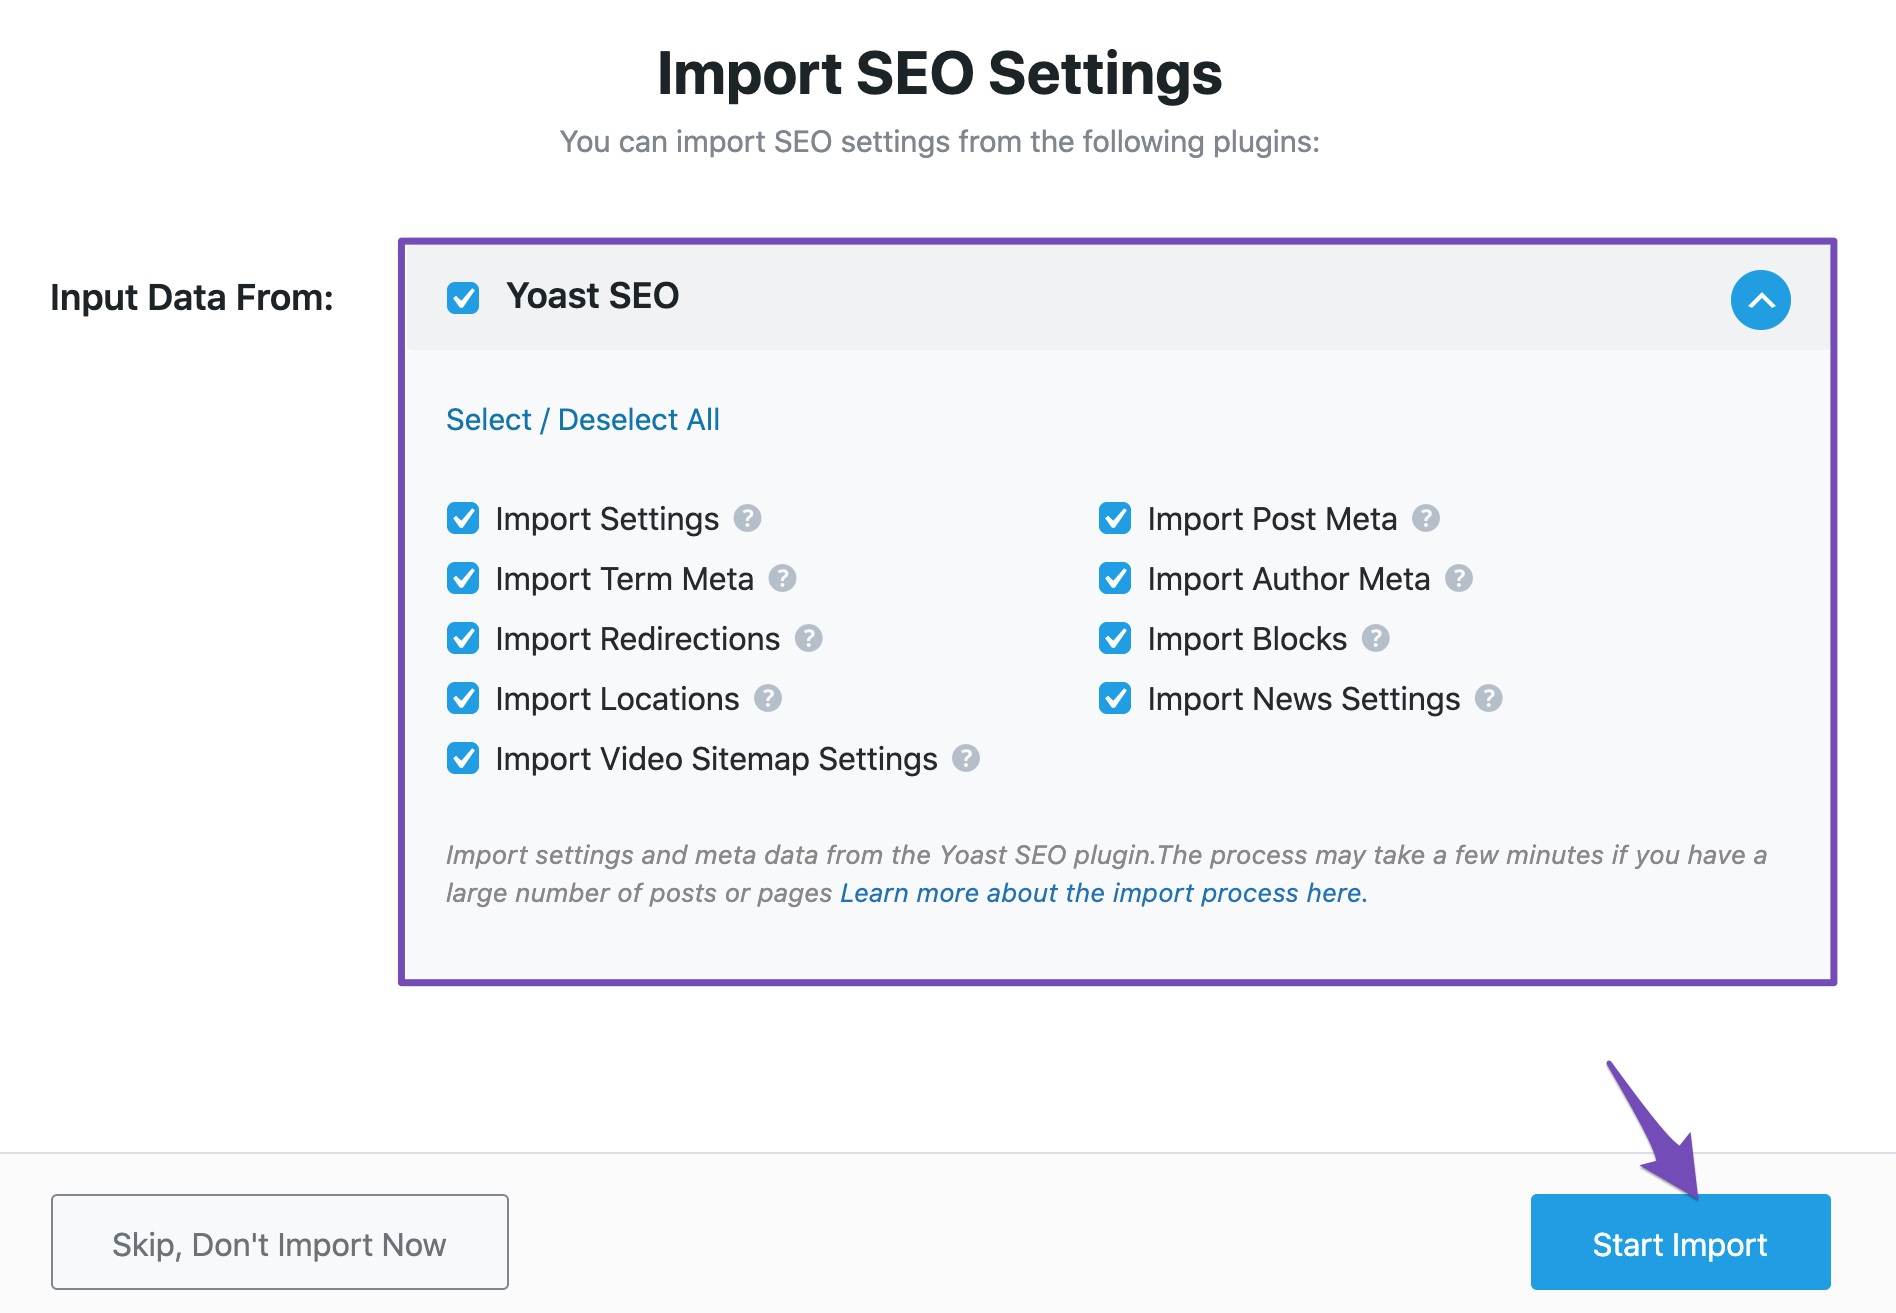 Input data available from Yoast 